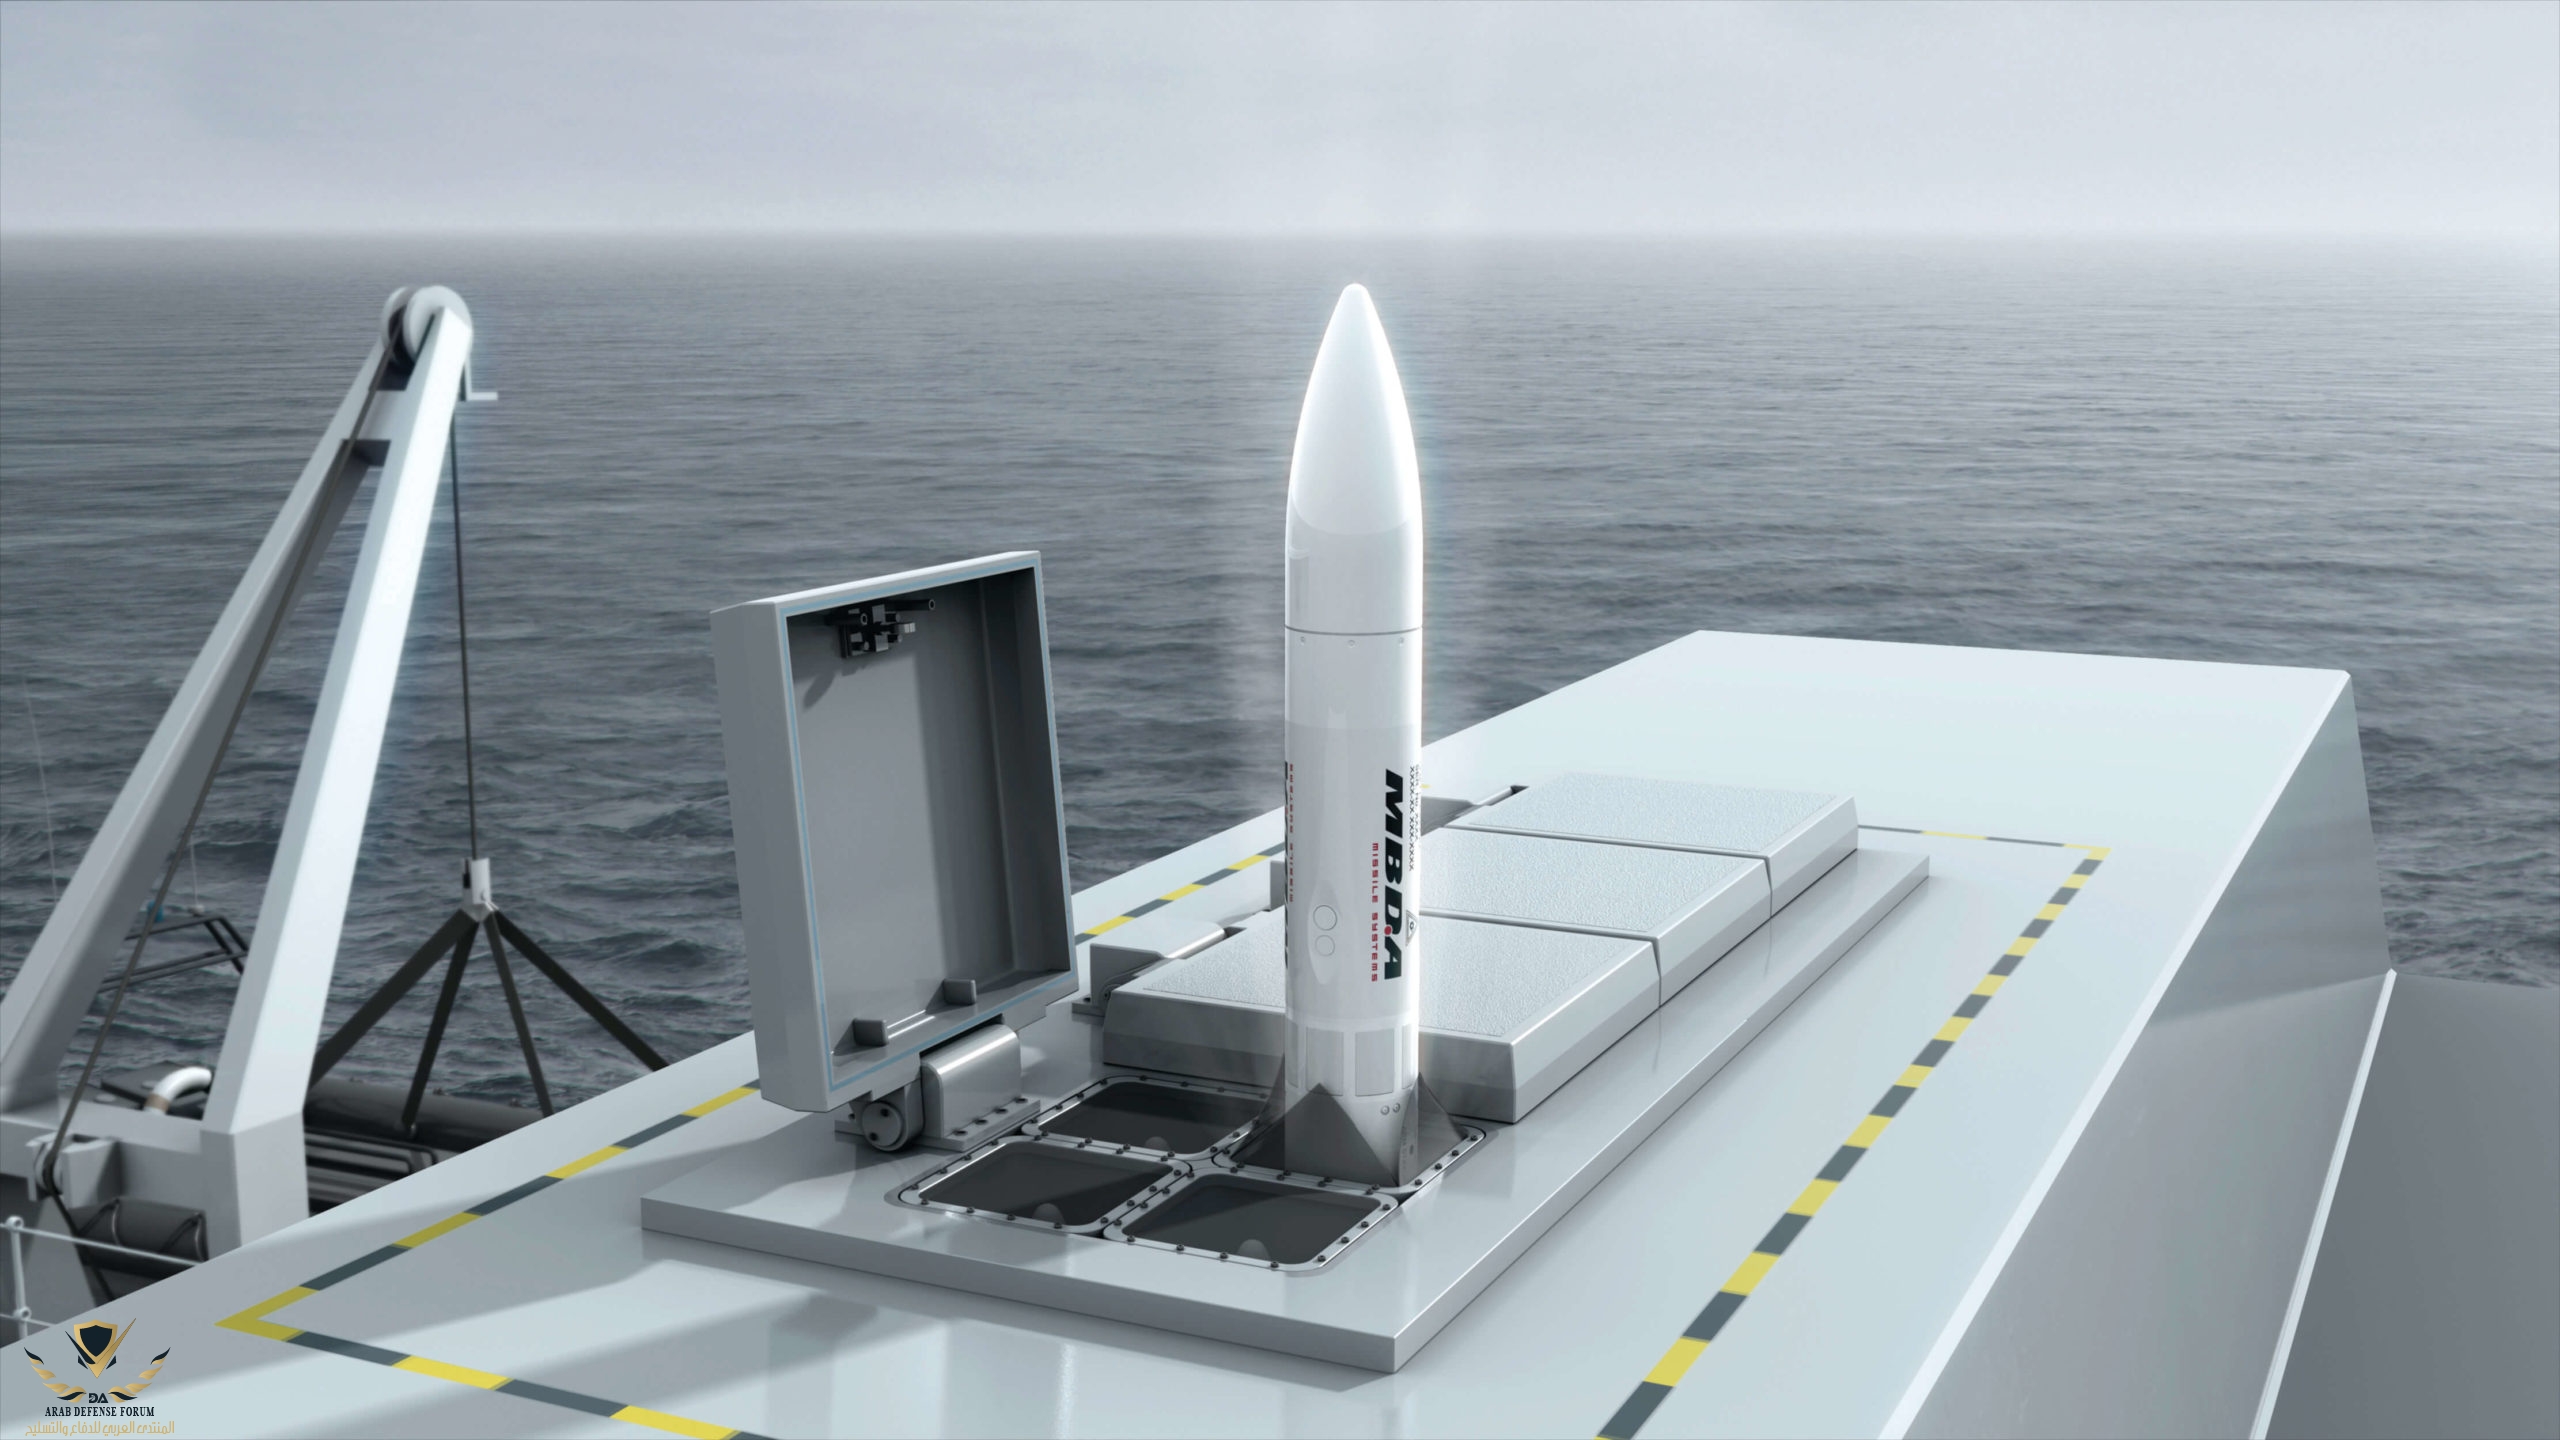 CMYK-SEA-CEPTOR-soft-vertical-launch-of-CAMM-Copyright-MBDA-BMT-scaled-1.jpg